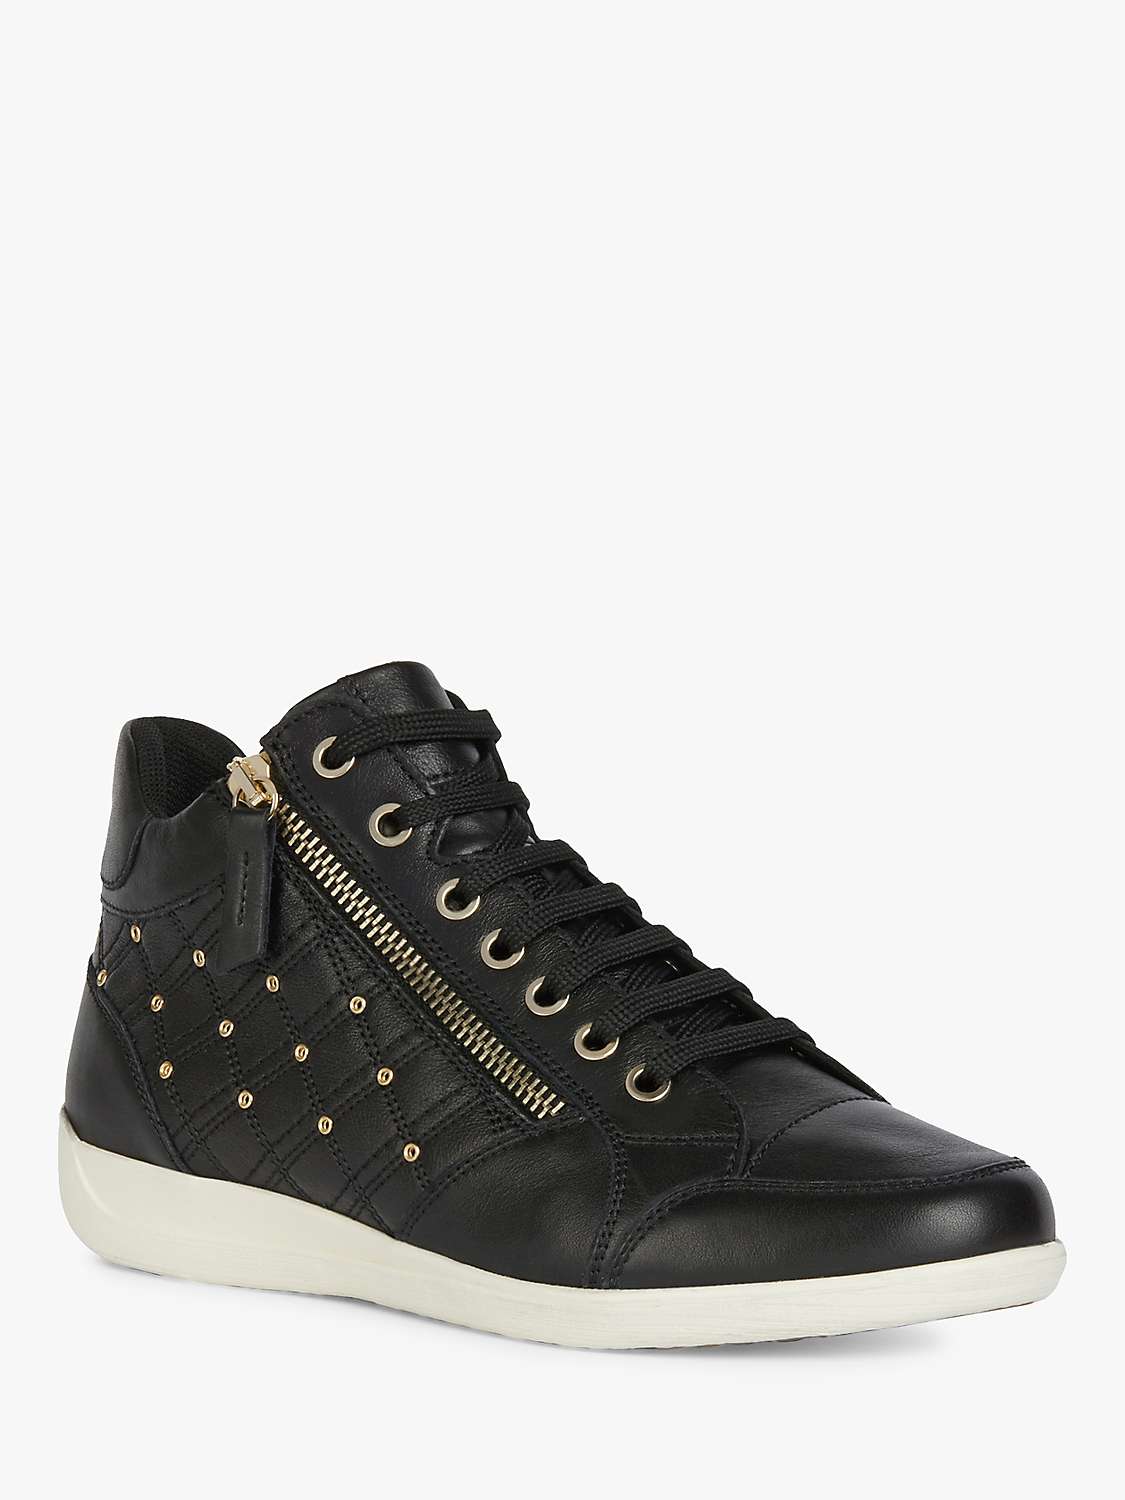 Buy Geox Women's Myria Wide Fit Leather Lace Up Trainers, Black Online at johnlewis.com